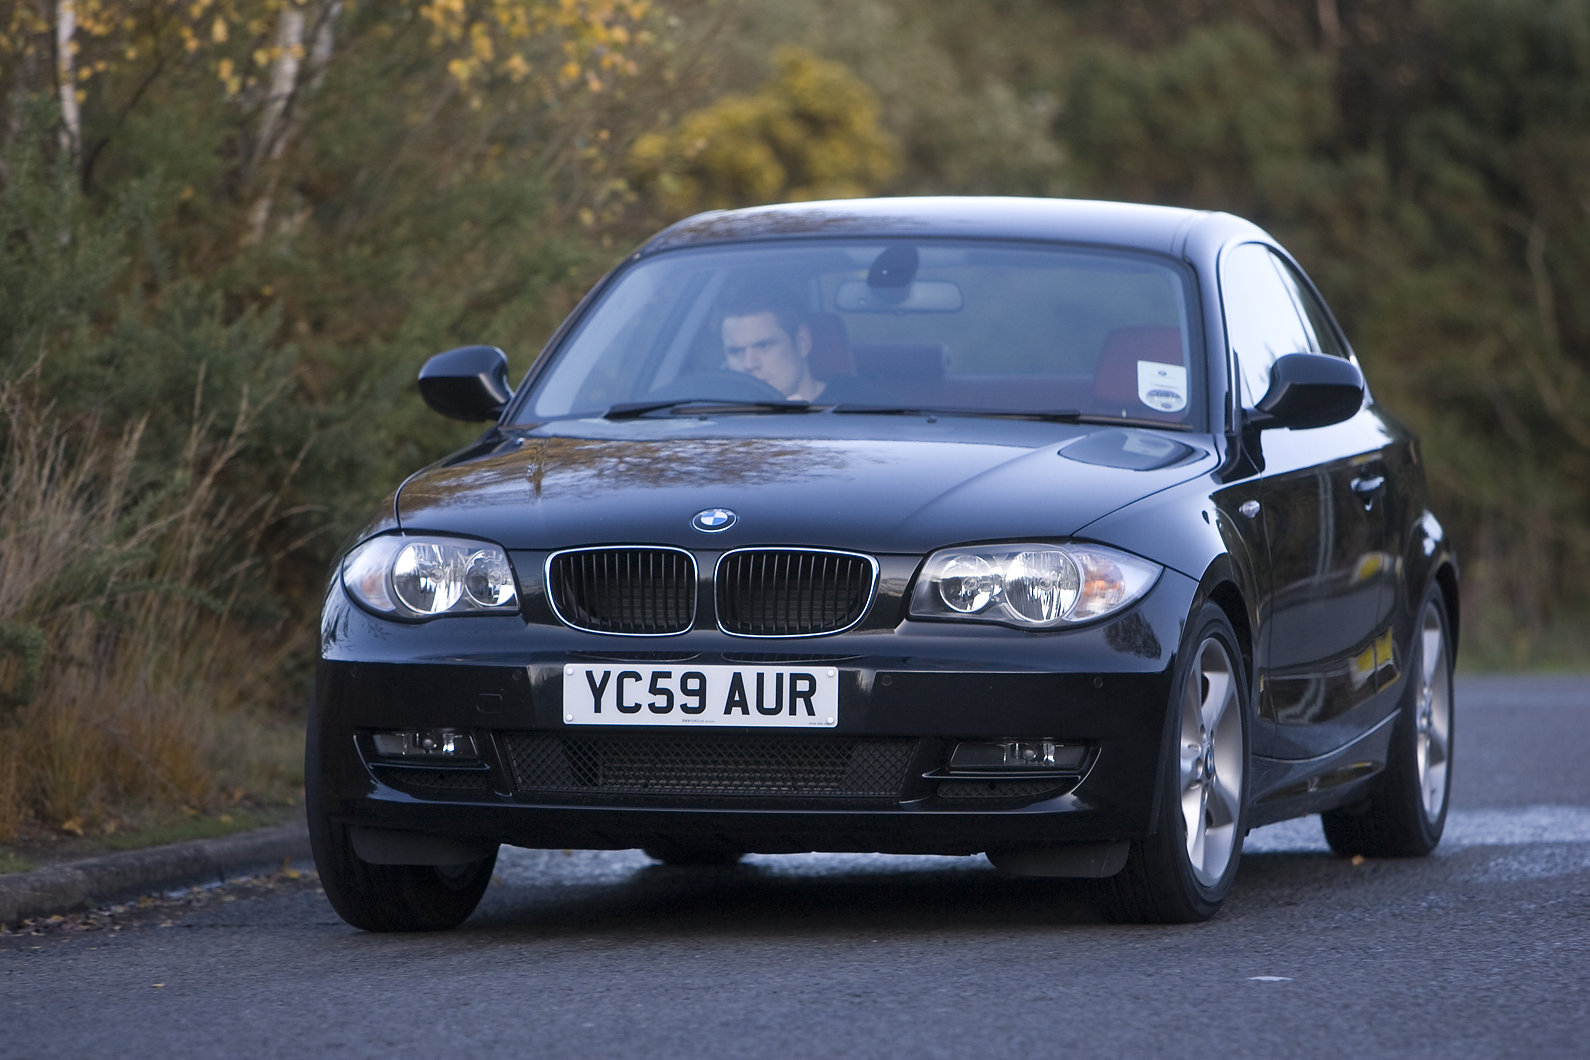 BMW 1 Series (2011-2015) Review